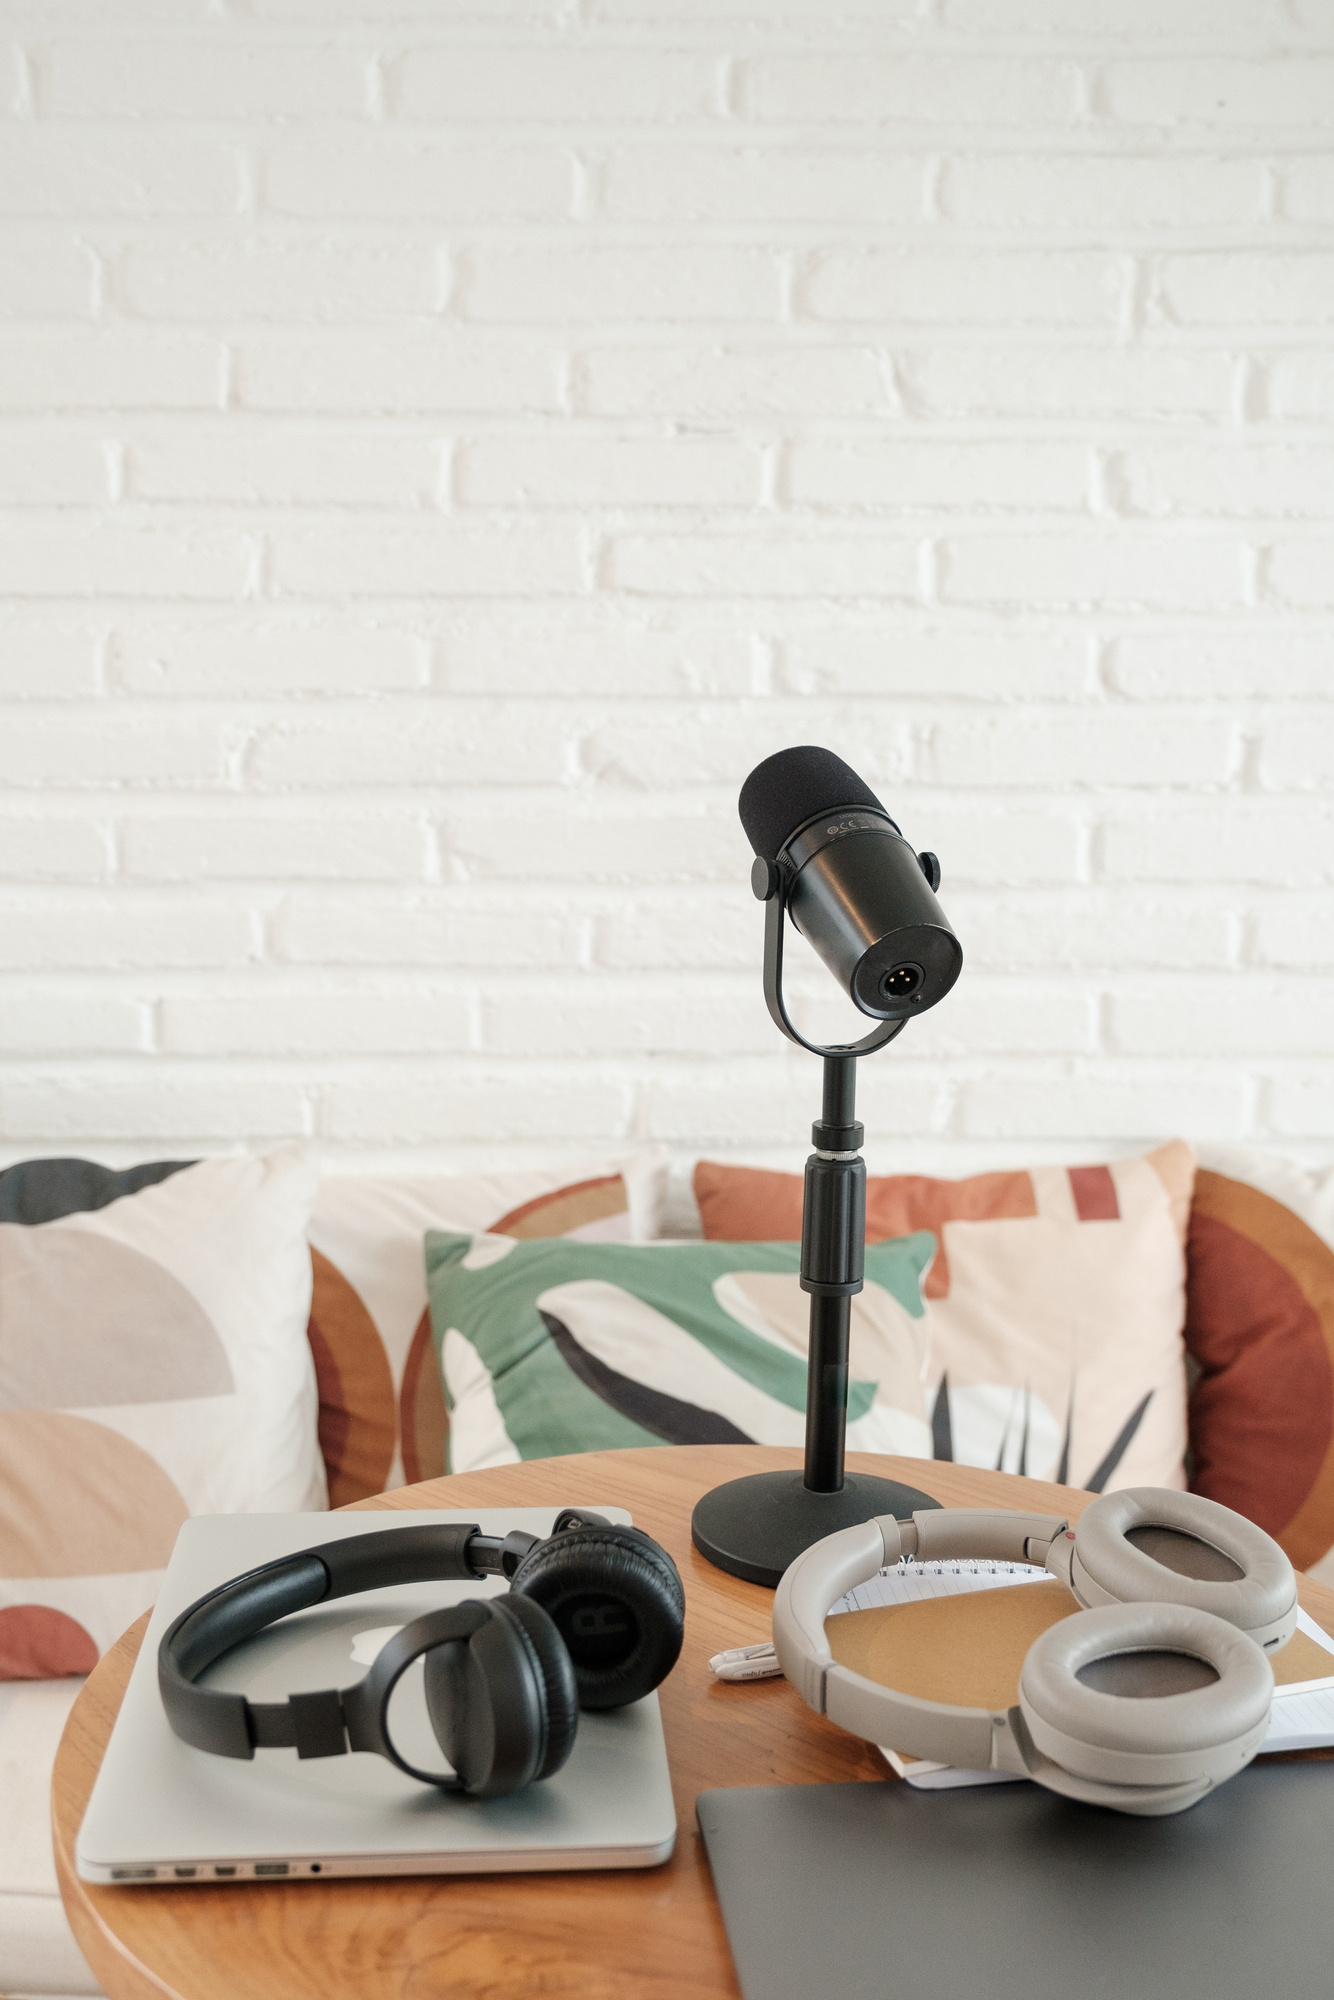 Headphones and Microphone for Podcast